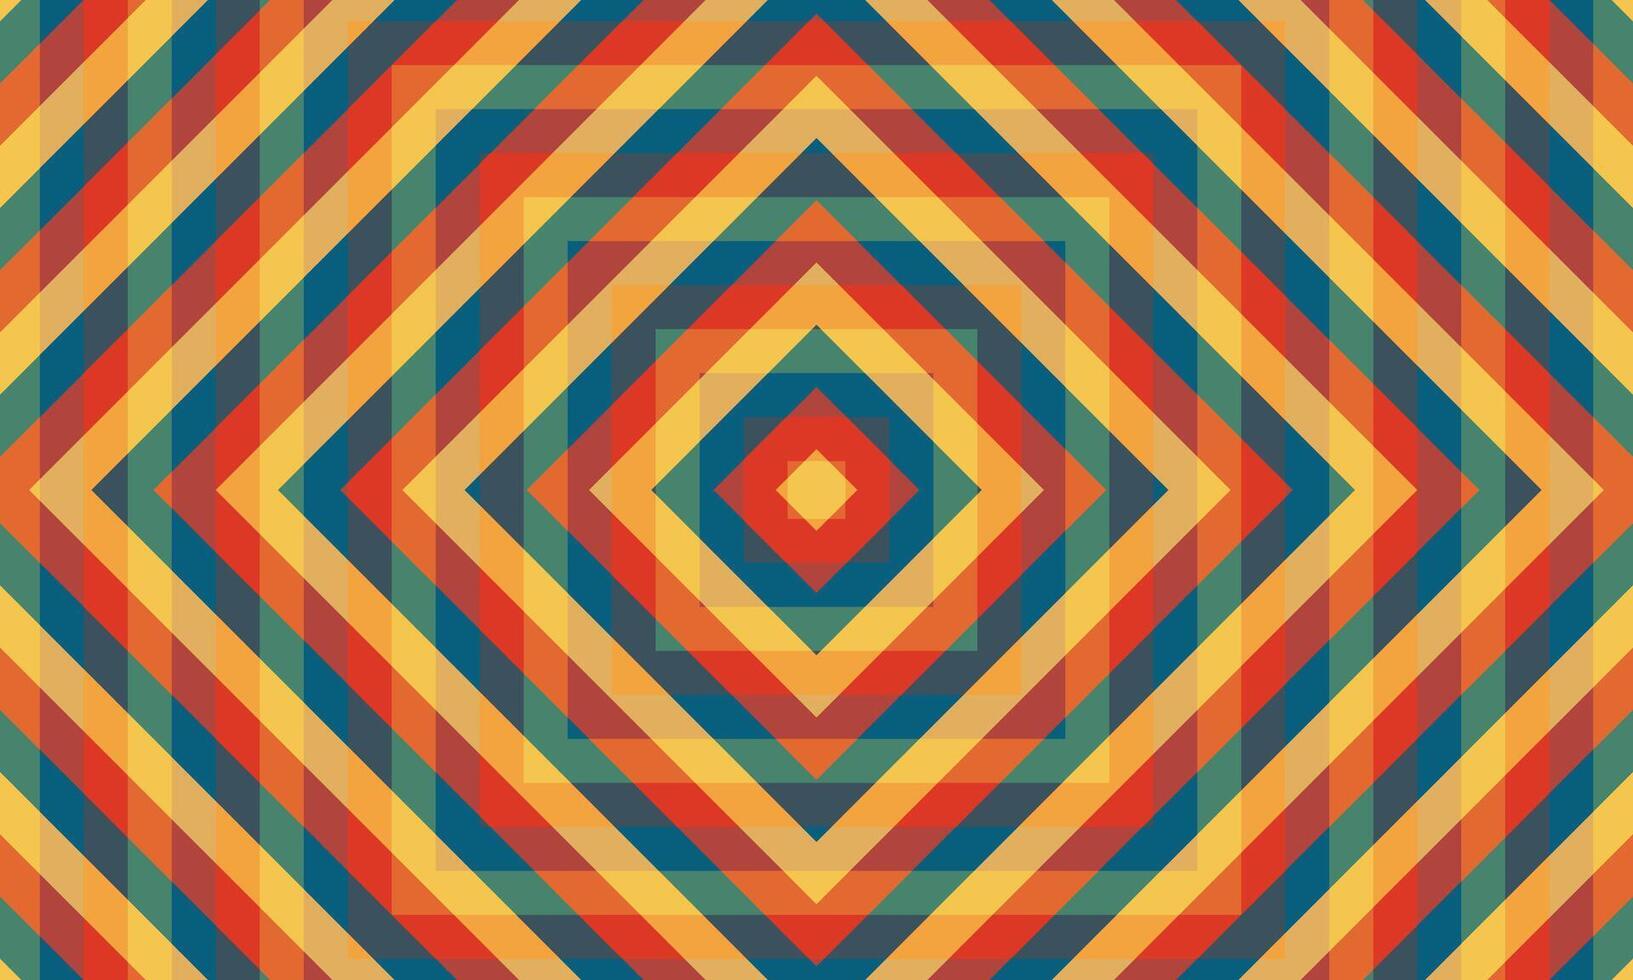 Abstract retro psychedelic trippy background vector